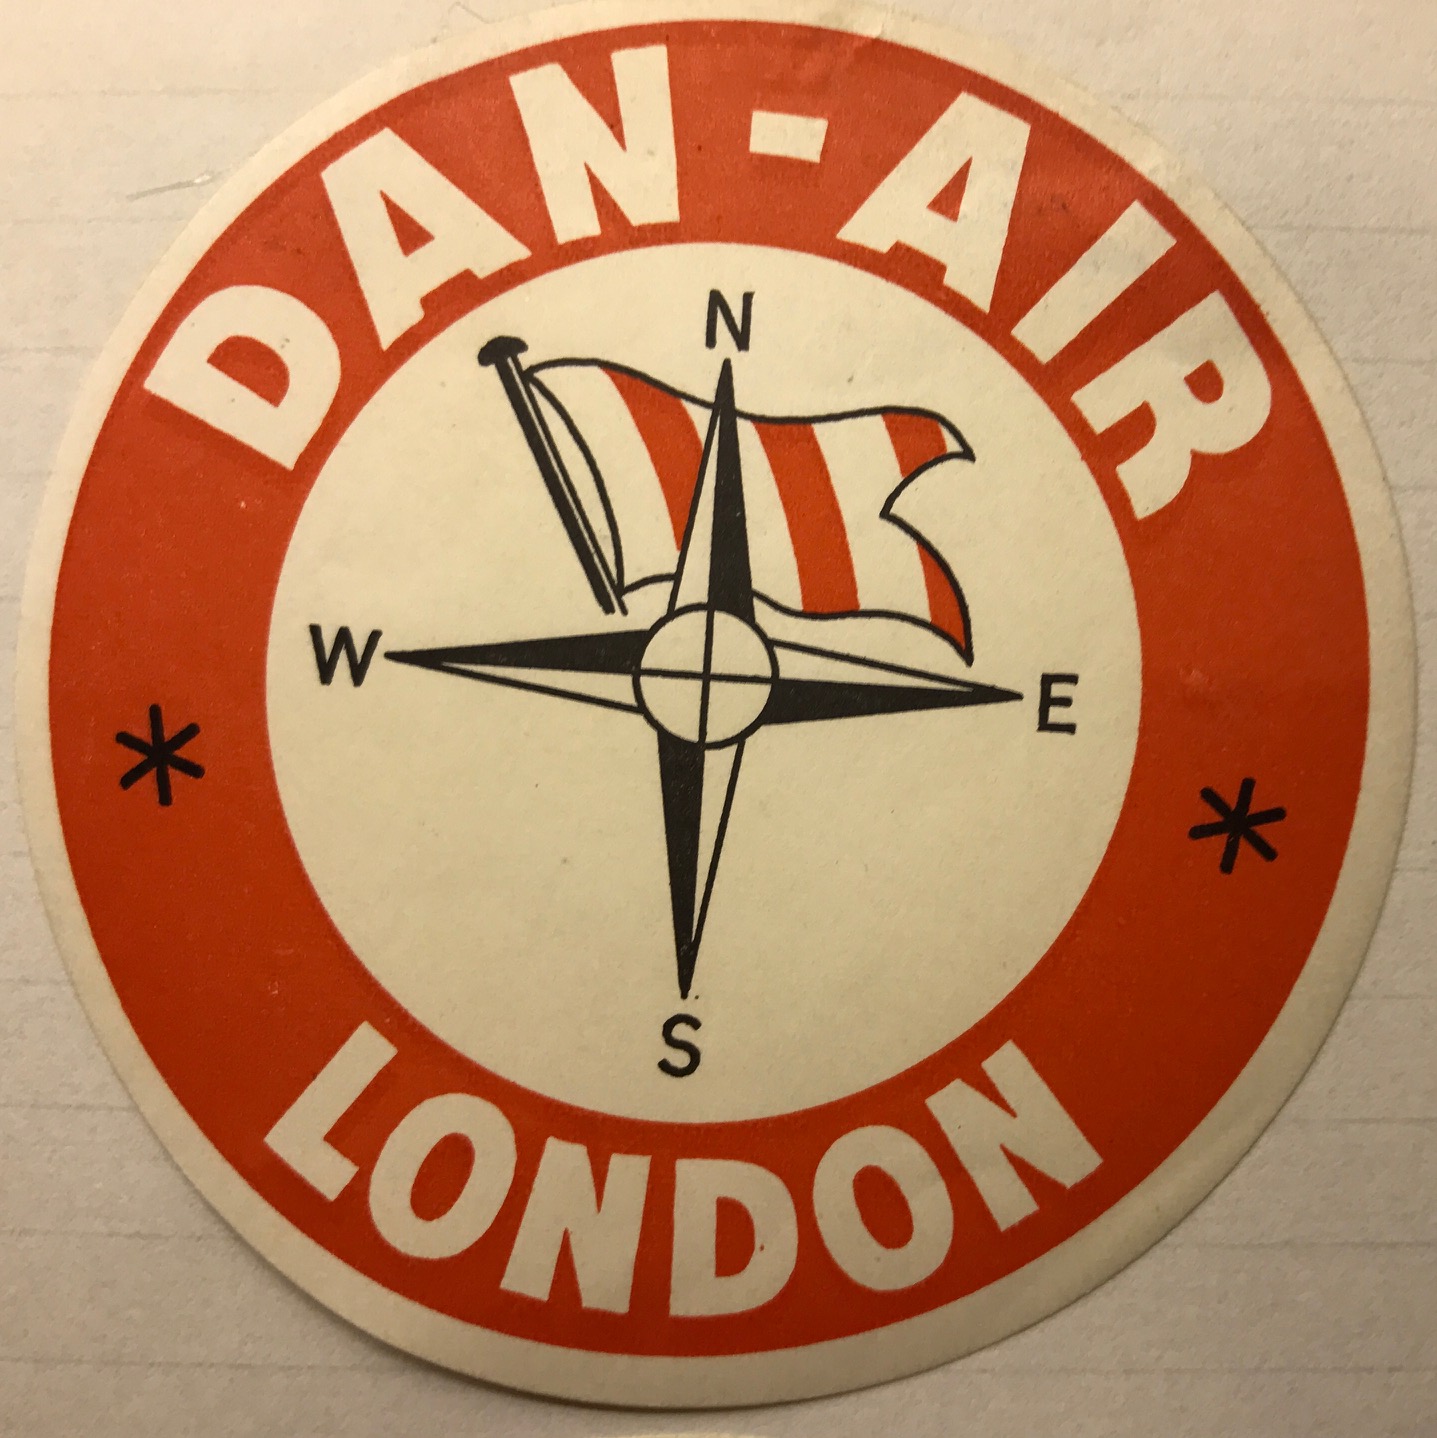 Trevor's Stickies: Danair. Formed 1953. Flew lots of jets, including Comets, from Gatwick. Merged with British Airways 1992.